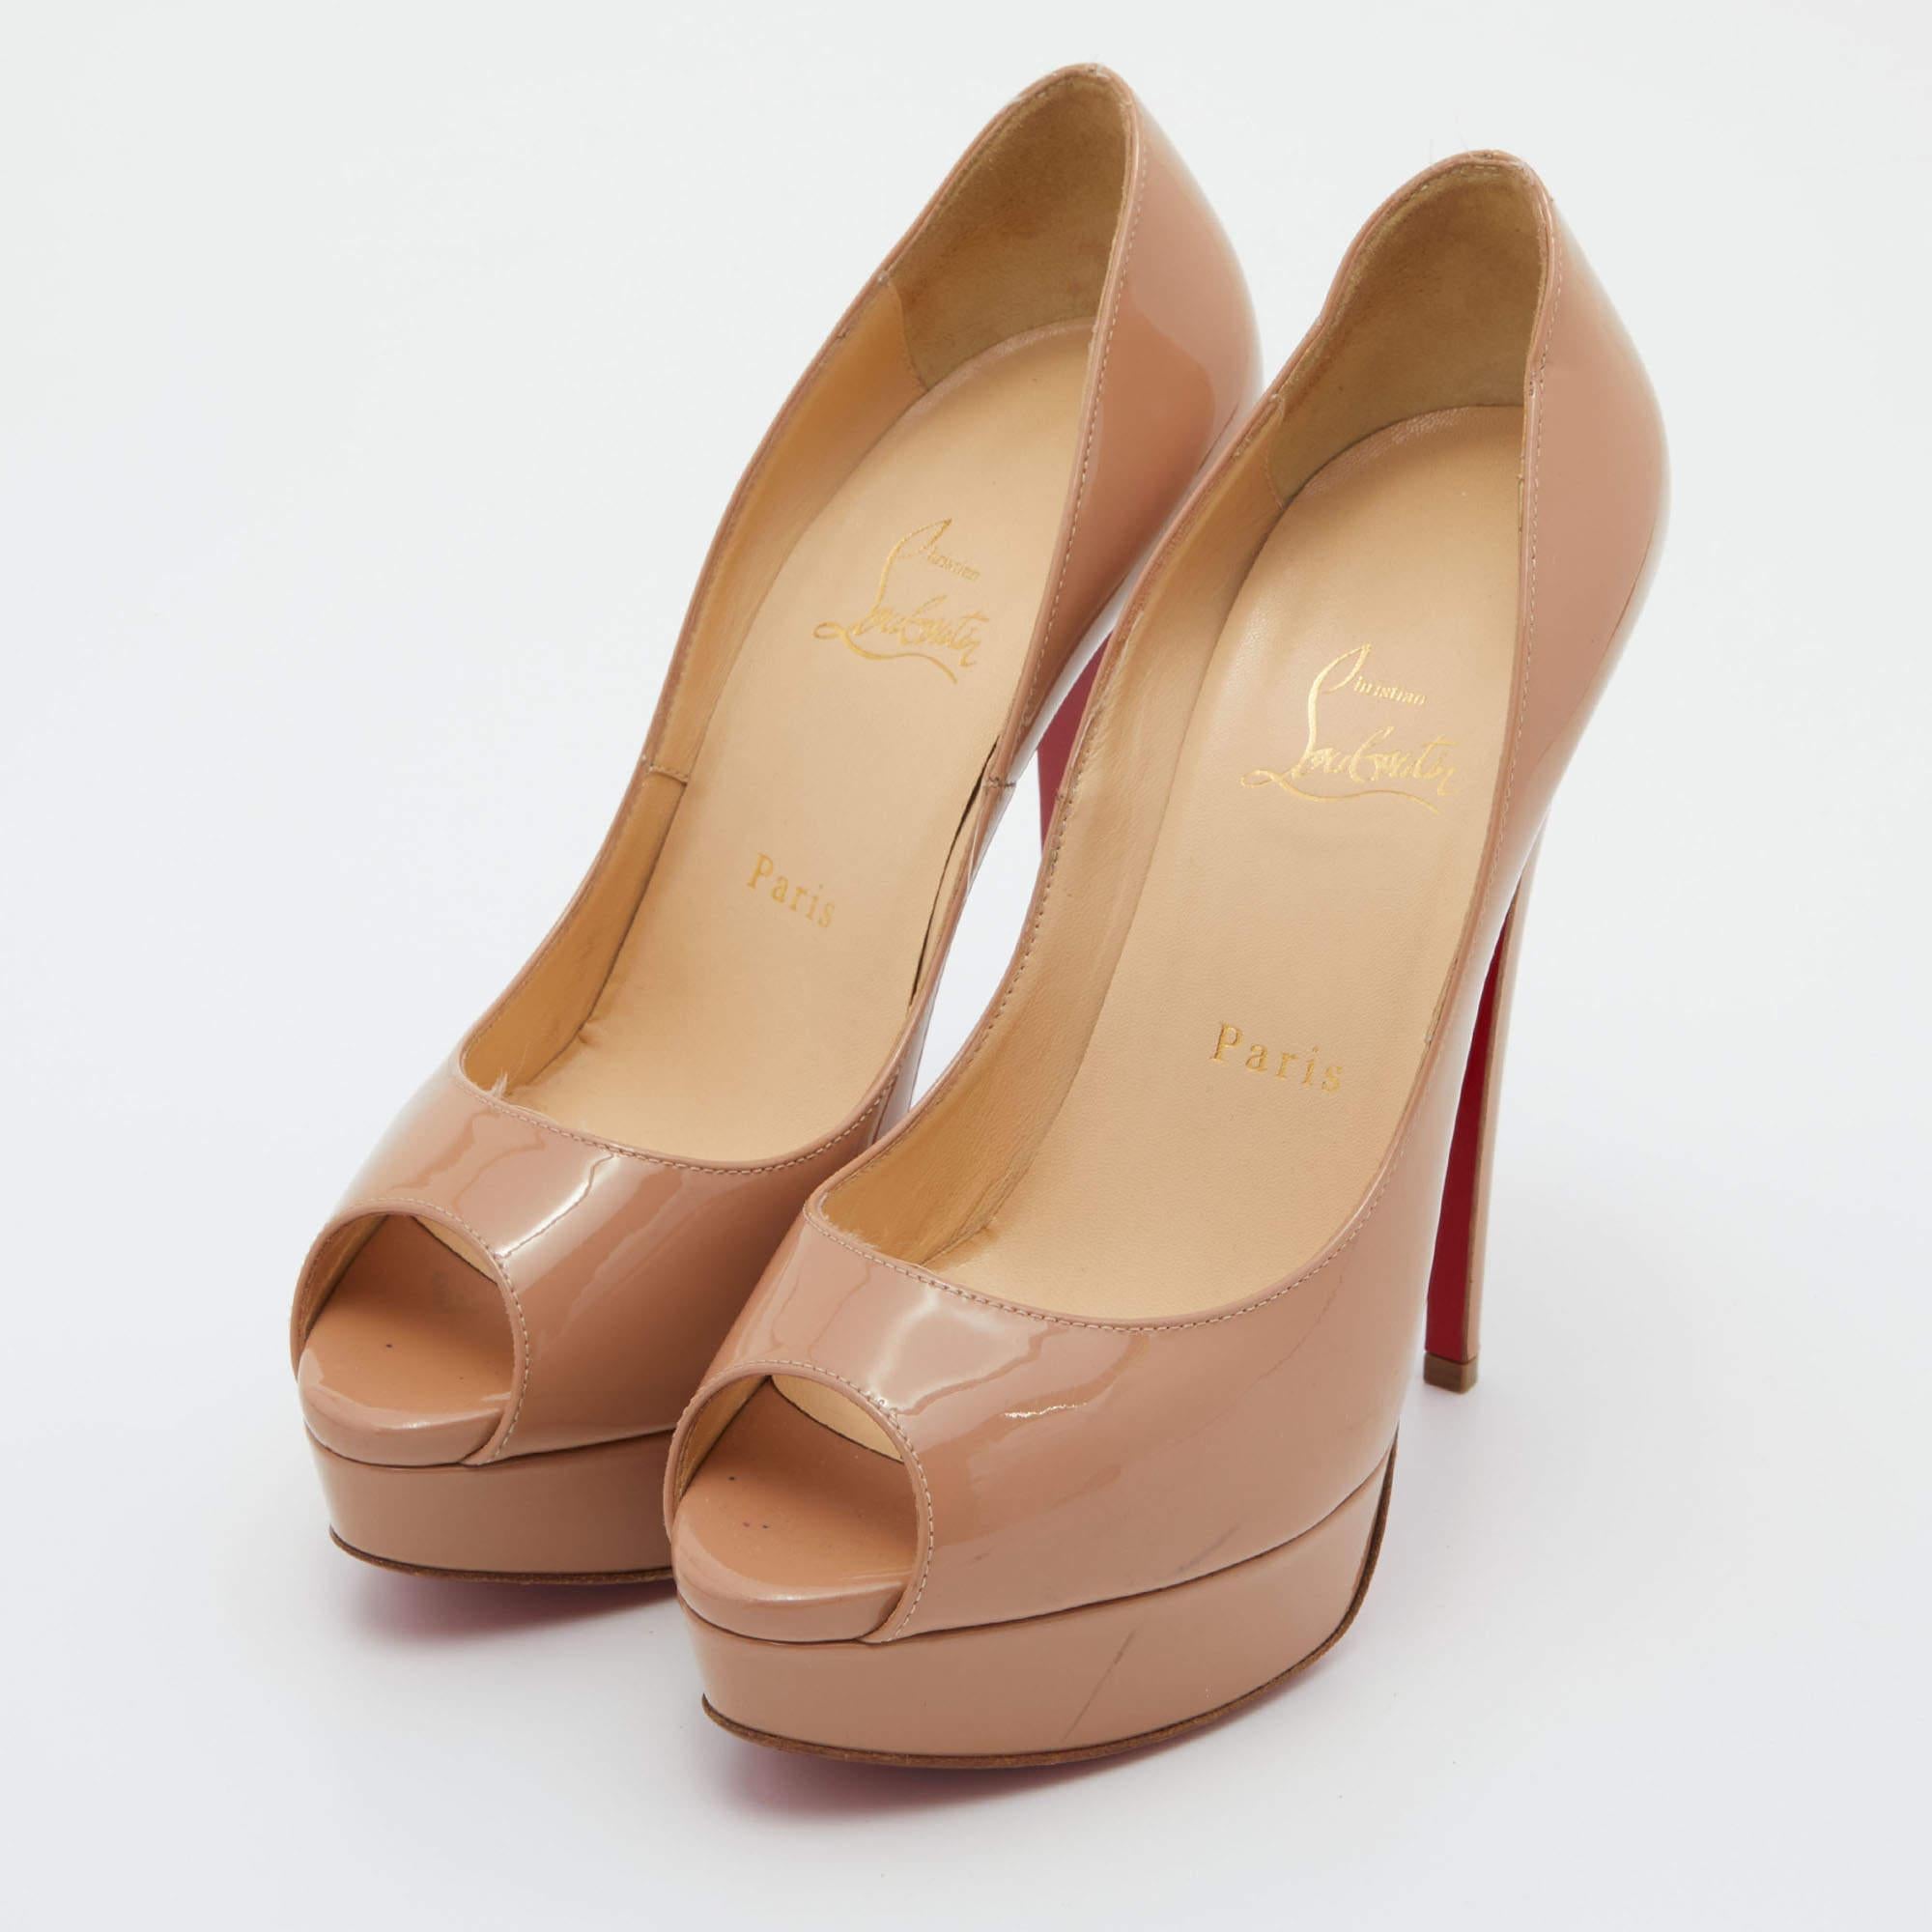 Stand out from the crowd with this luxurious pair of Louboutins that exude high fashion with class. Crafted from patent leather, this is a creation from their Lady Peep collection. It features a beige shade with peep toes and an architectural shape.